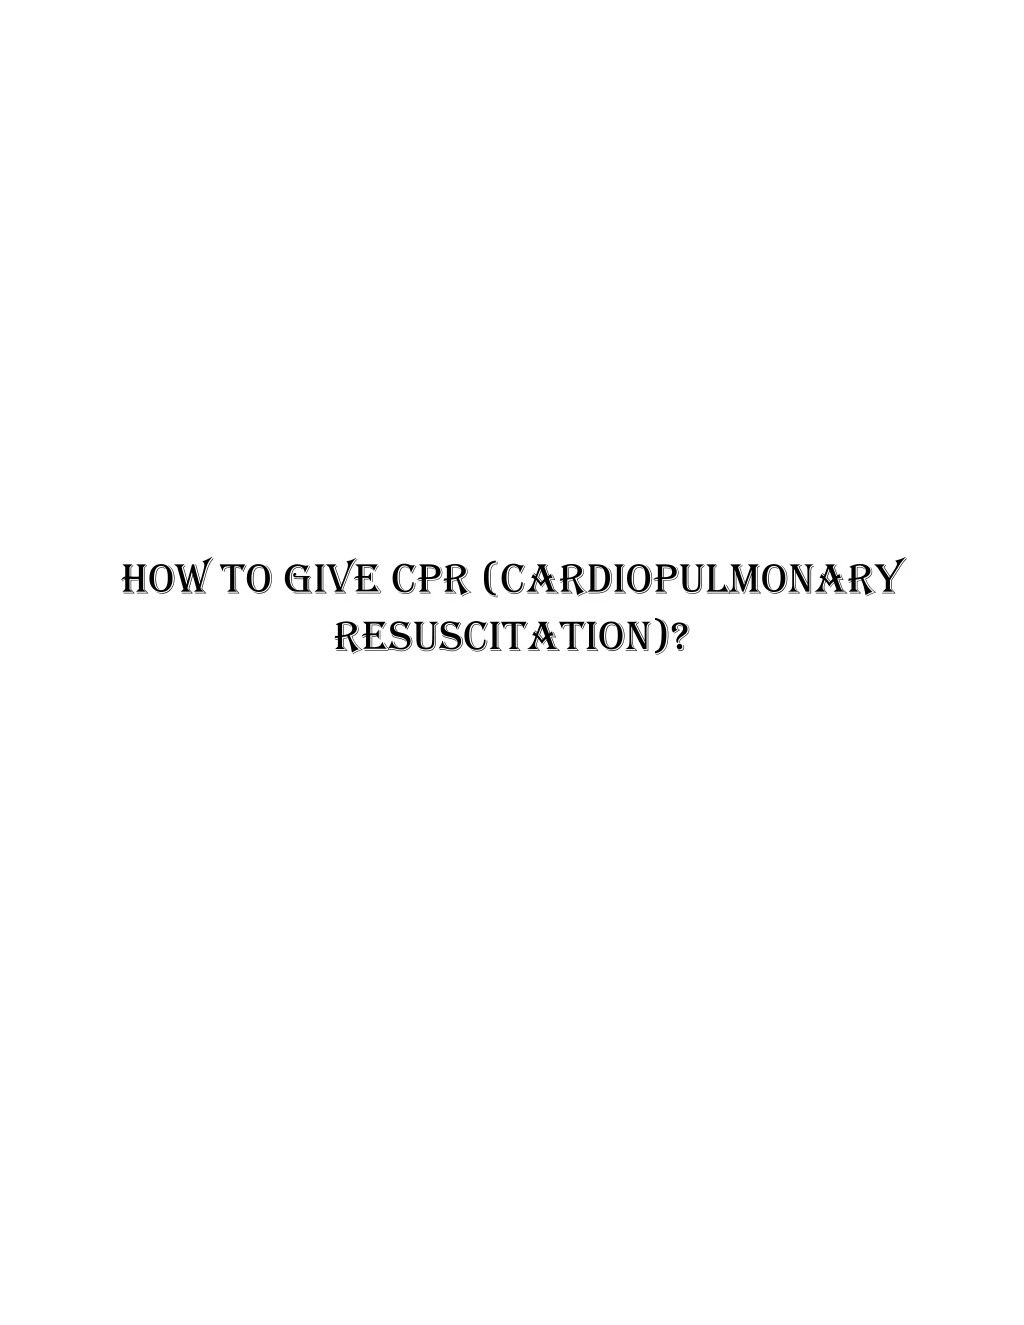 how to give cpr cardiopulmonary resuscitation